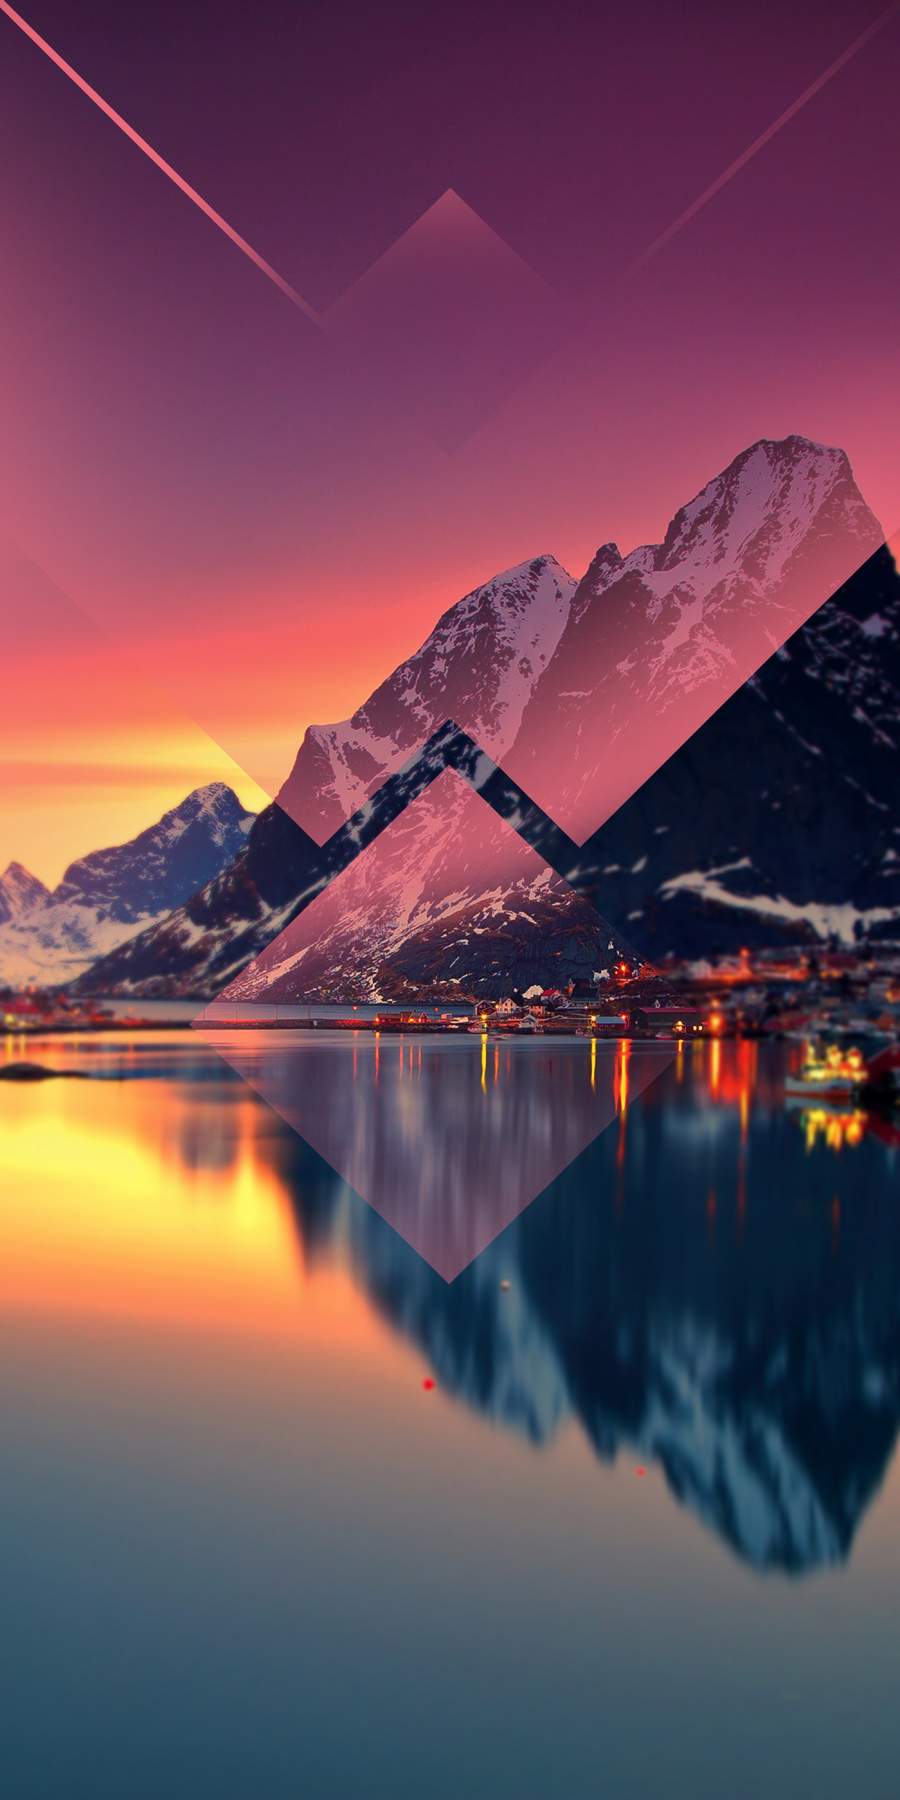 Sunset Reflection In Lake Wallpapers